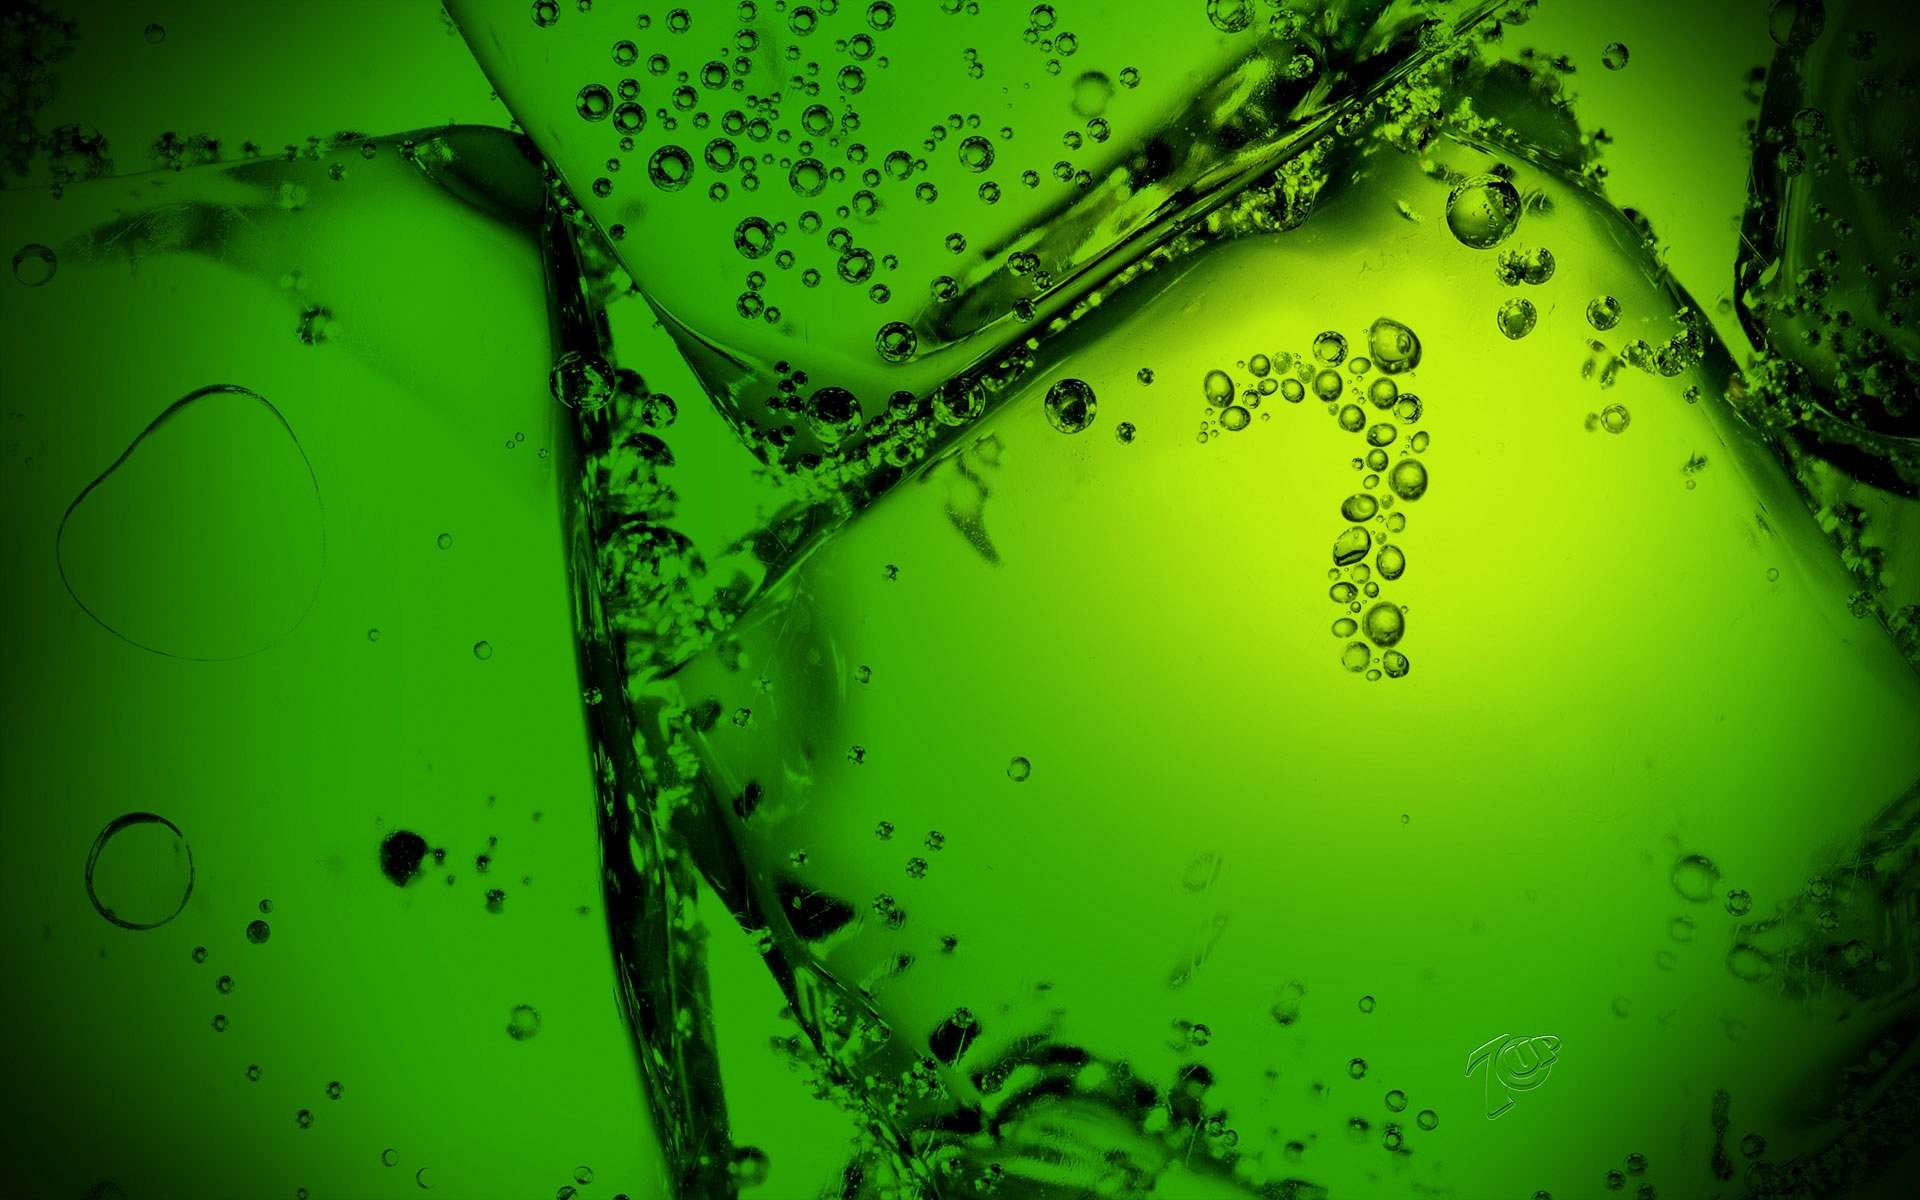 1920x1200 Mountain Dew Wallpapers, Desktop Backgrounds, Free Images Download | Akspic